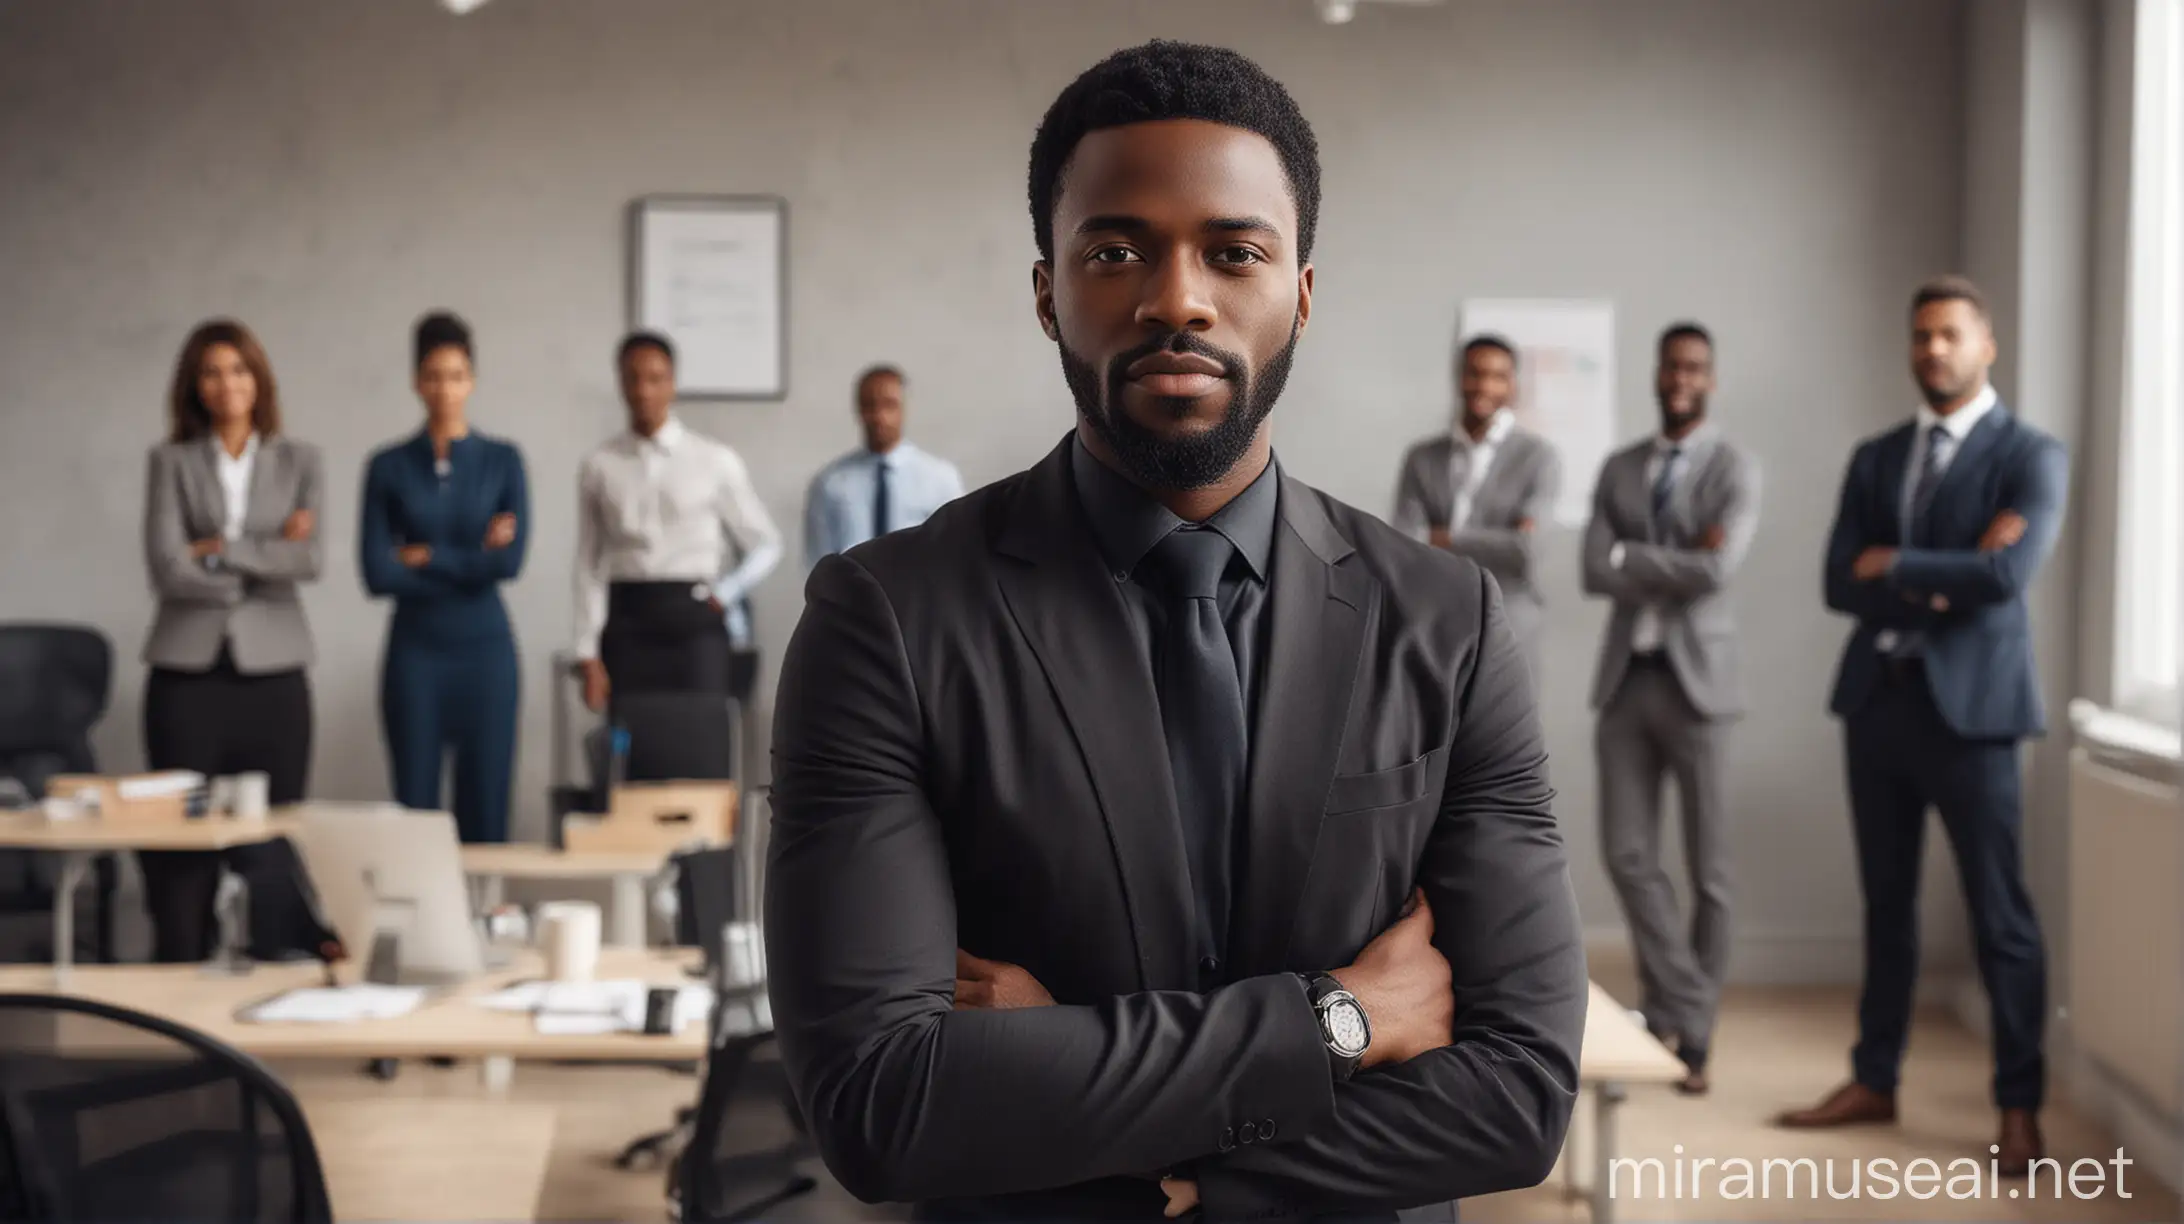 Successful Black Businessman Standing Out in Elegant Office Environment